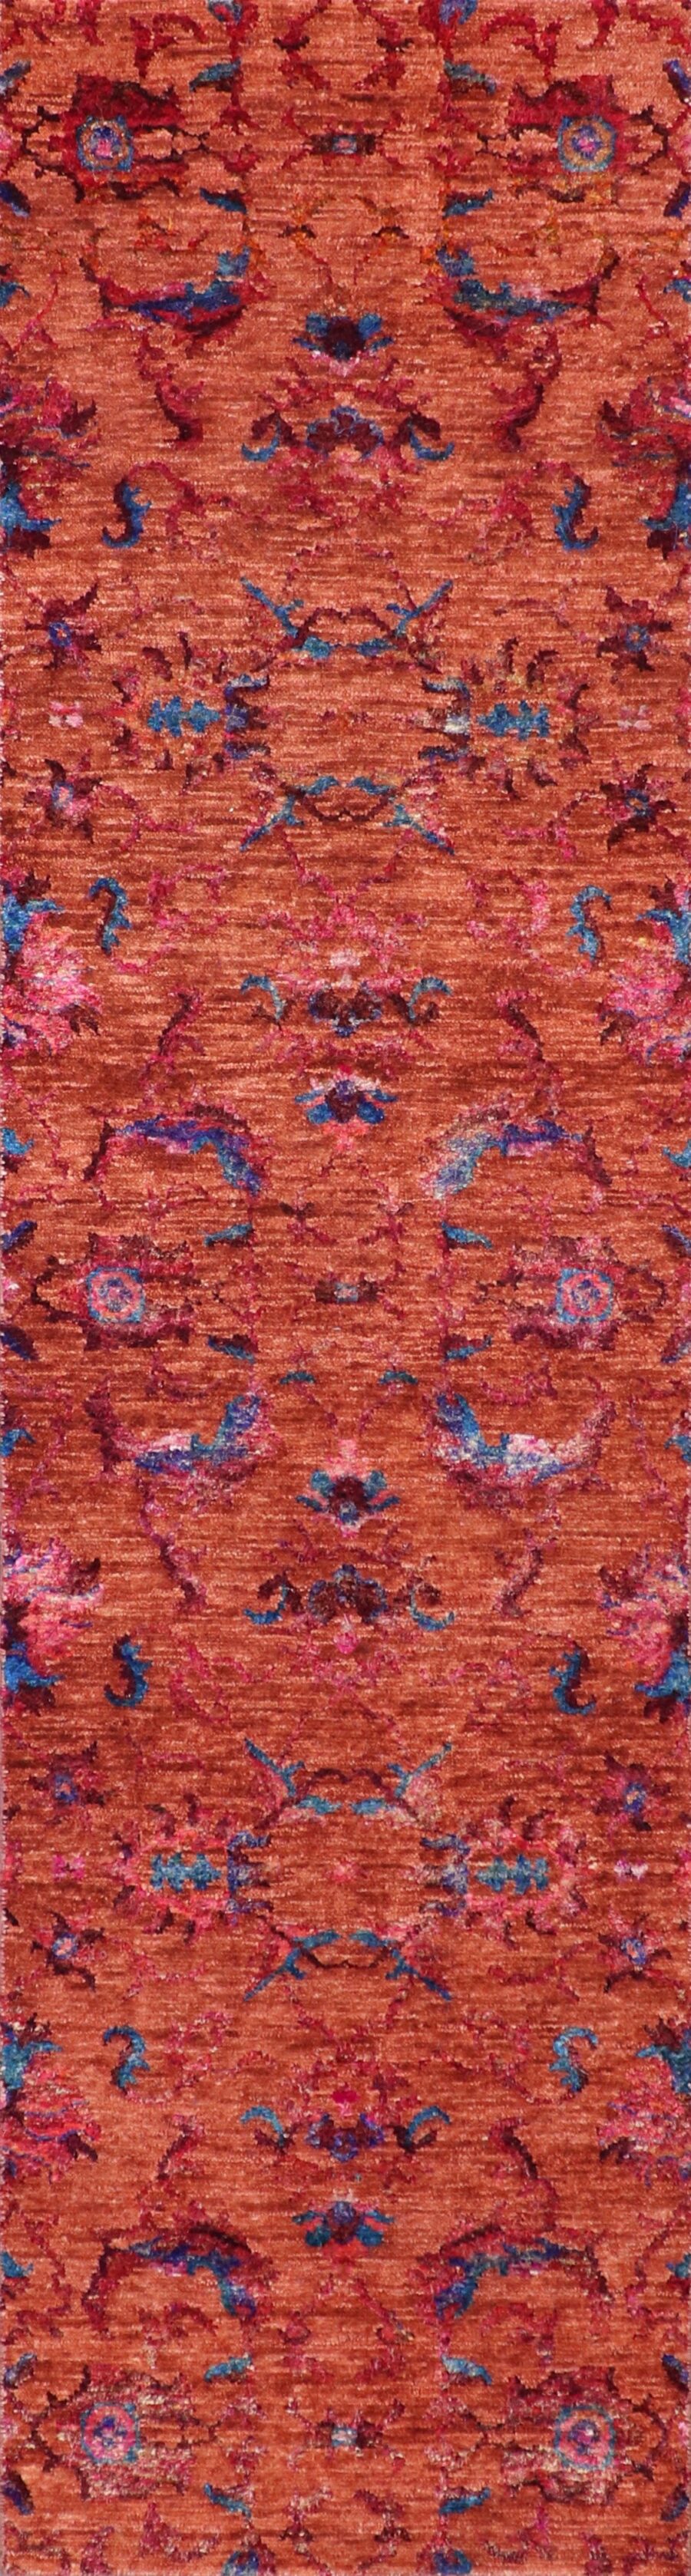 3’x11’10” Contemporary Orange & Blue Wool & Silk Hand-Knotted Rug - Direct Rug Import | Rugs in Chicago, Indiana,South Bend,Granger